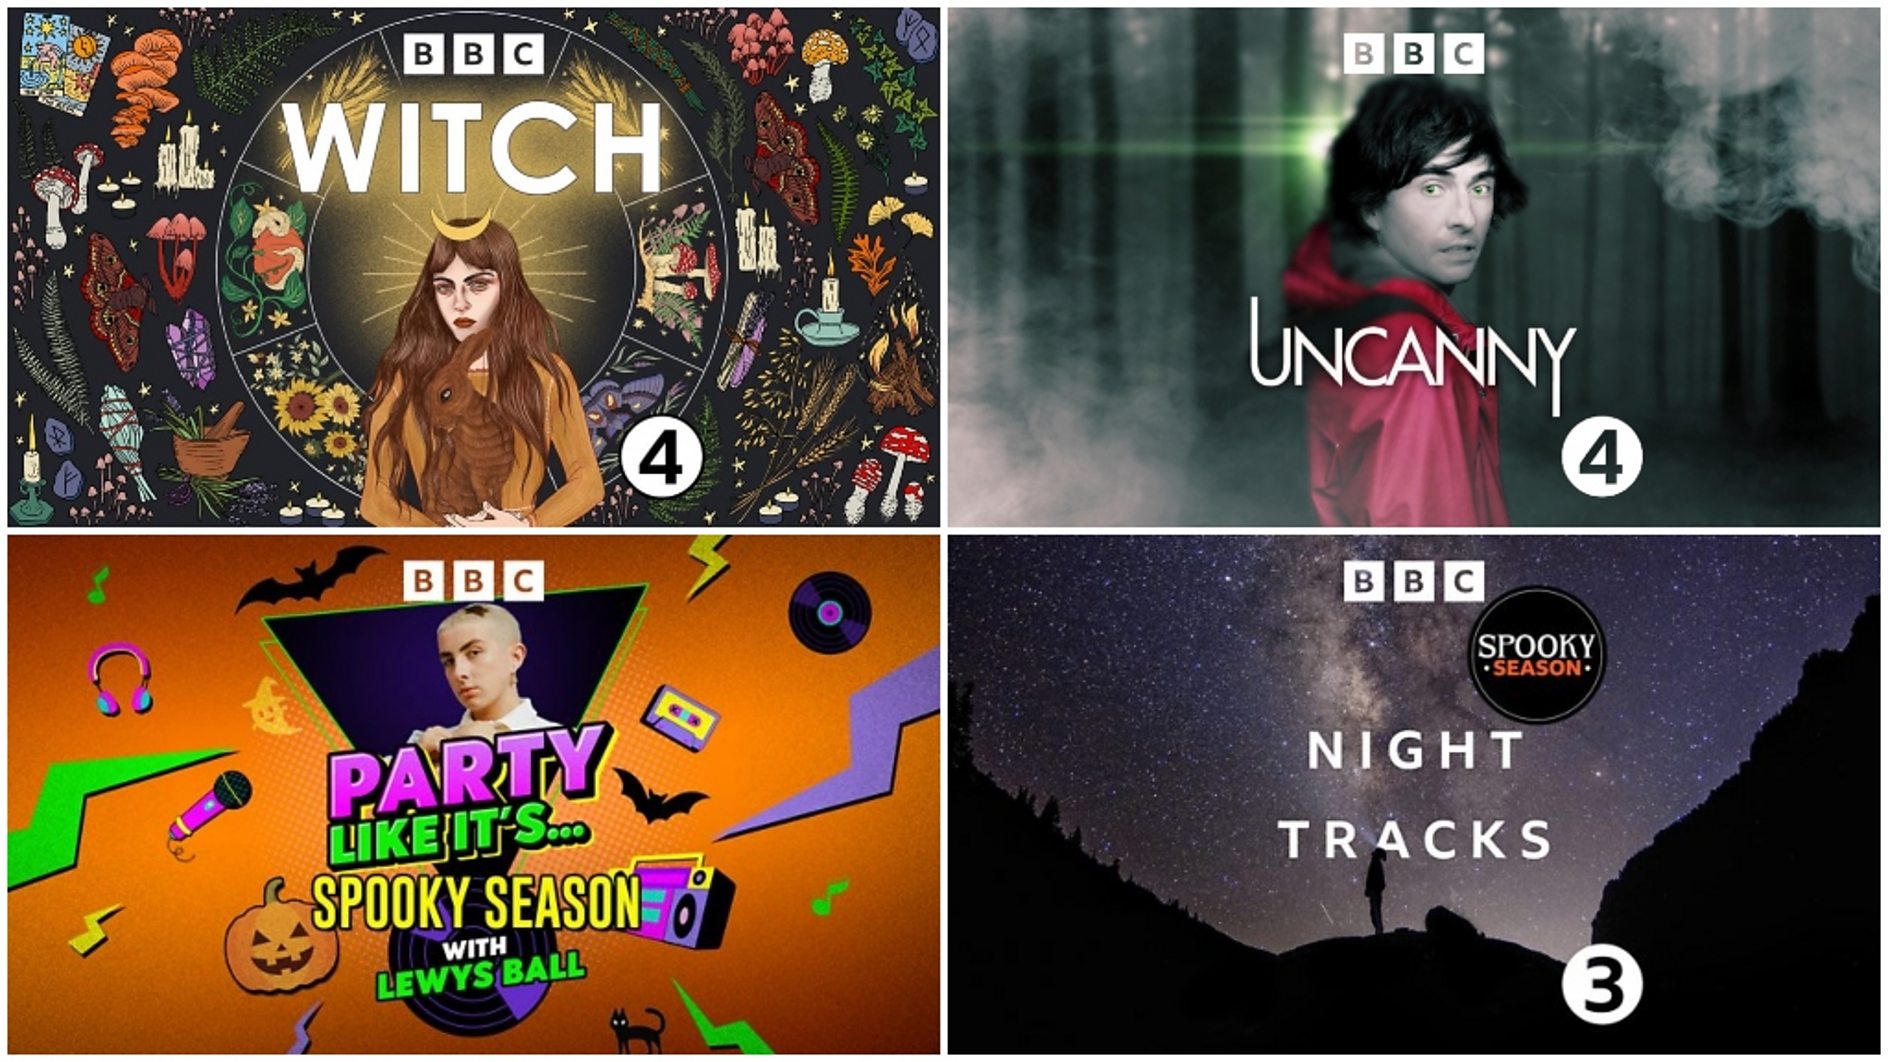 BBC Sounds spooky Halloween podcasts and party playlists